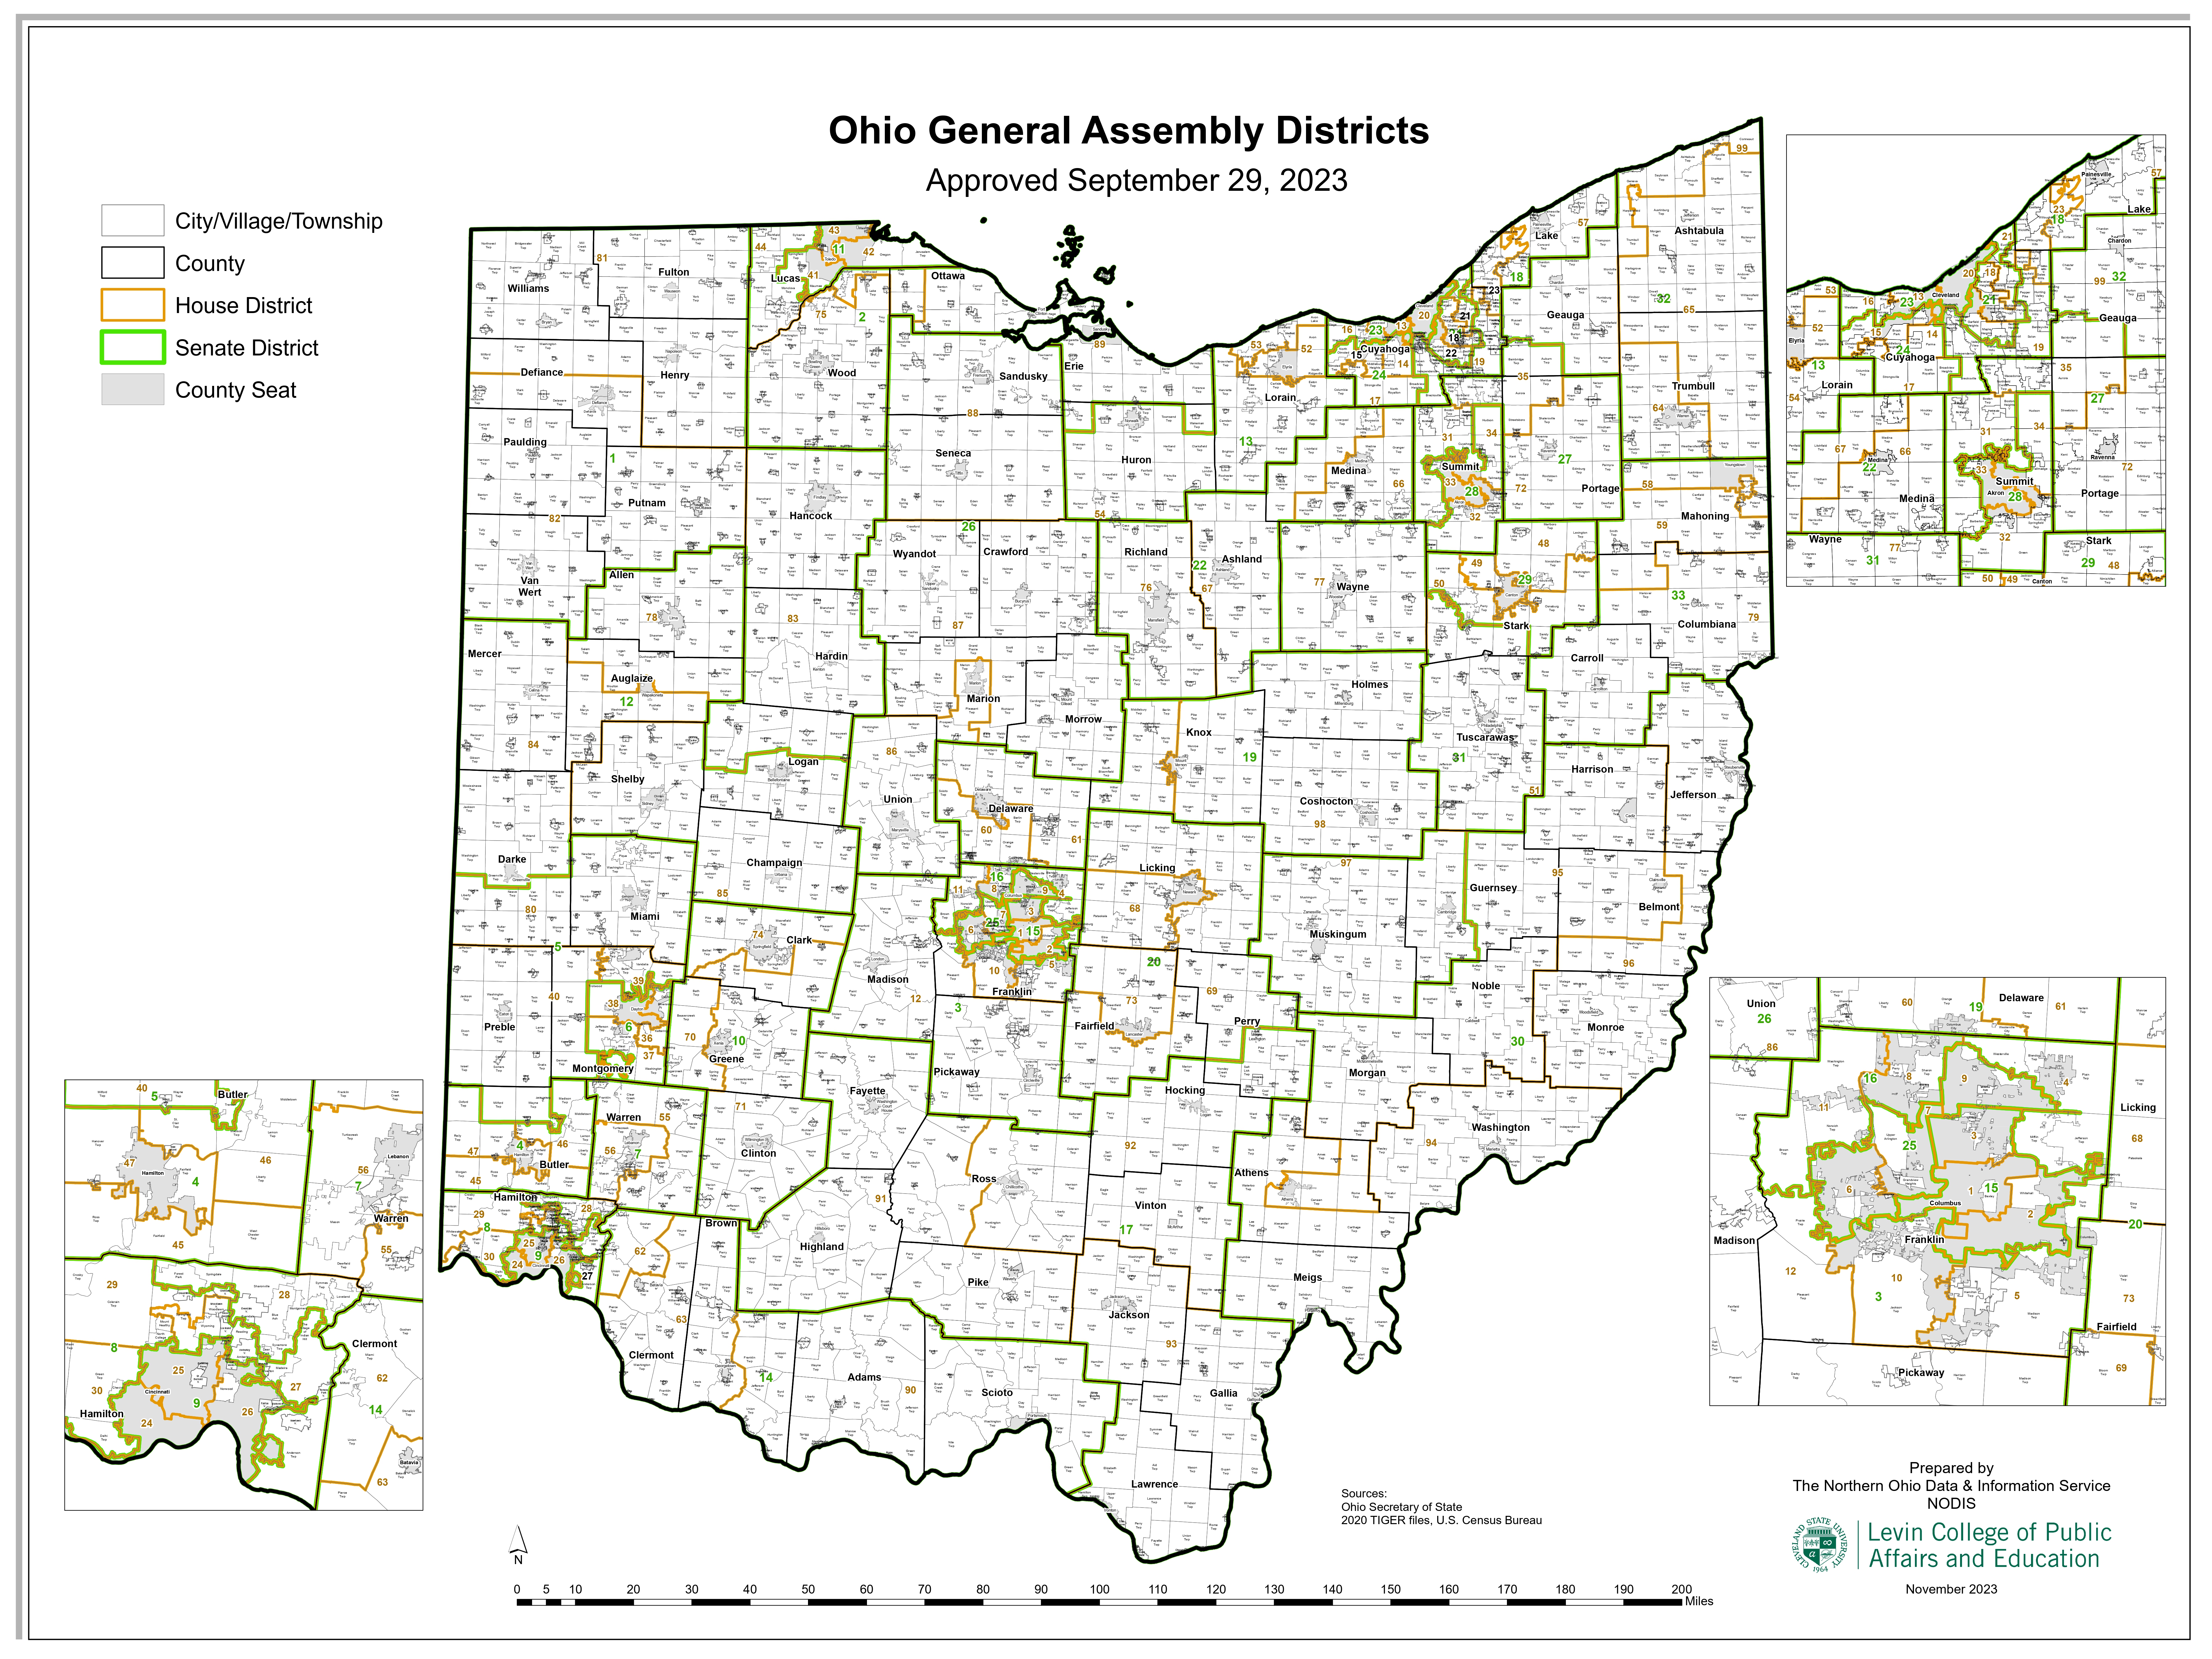 OhioGA-Districts-9_29_2023-with-insets_page-0001.jpg